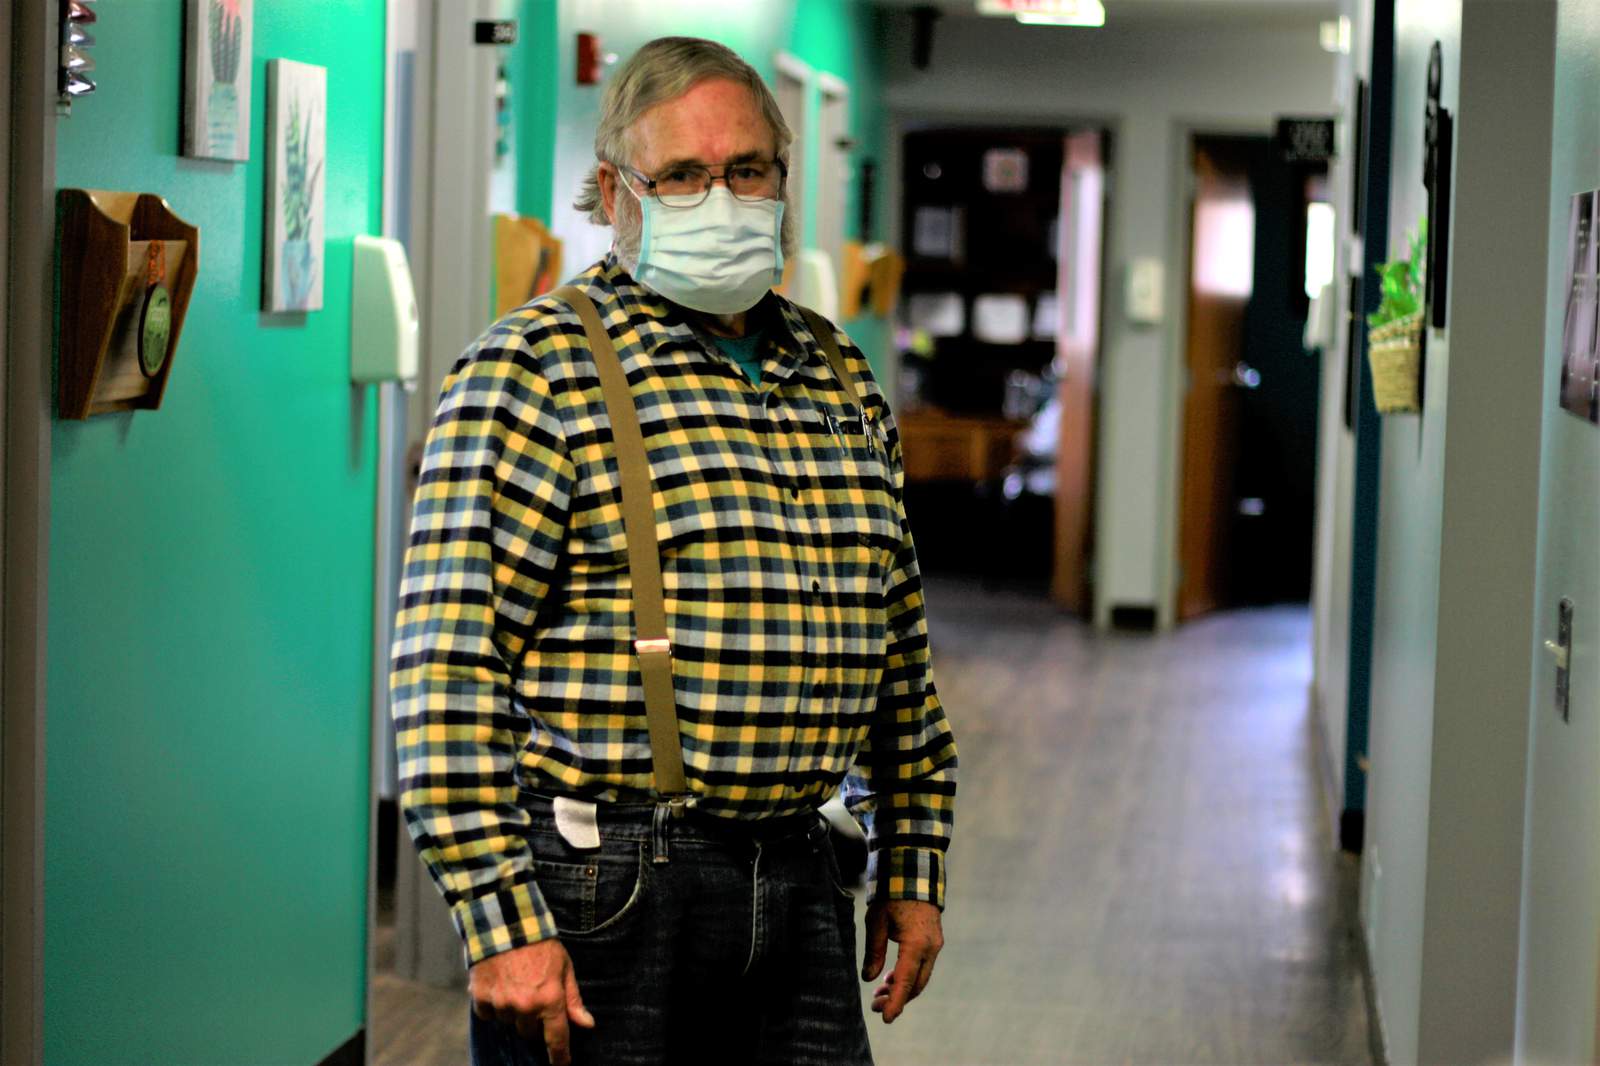 Rural Midwest hospitals struggling to handle virus surge